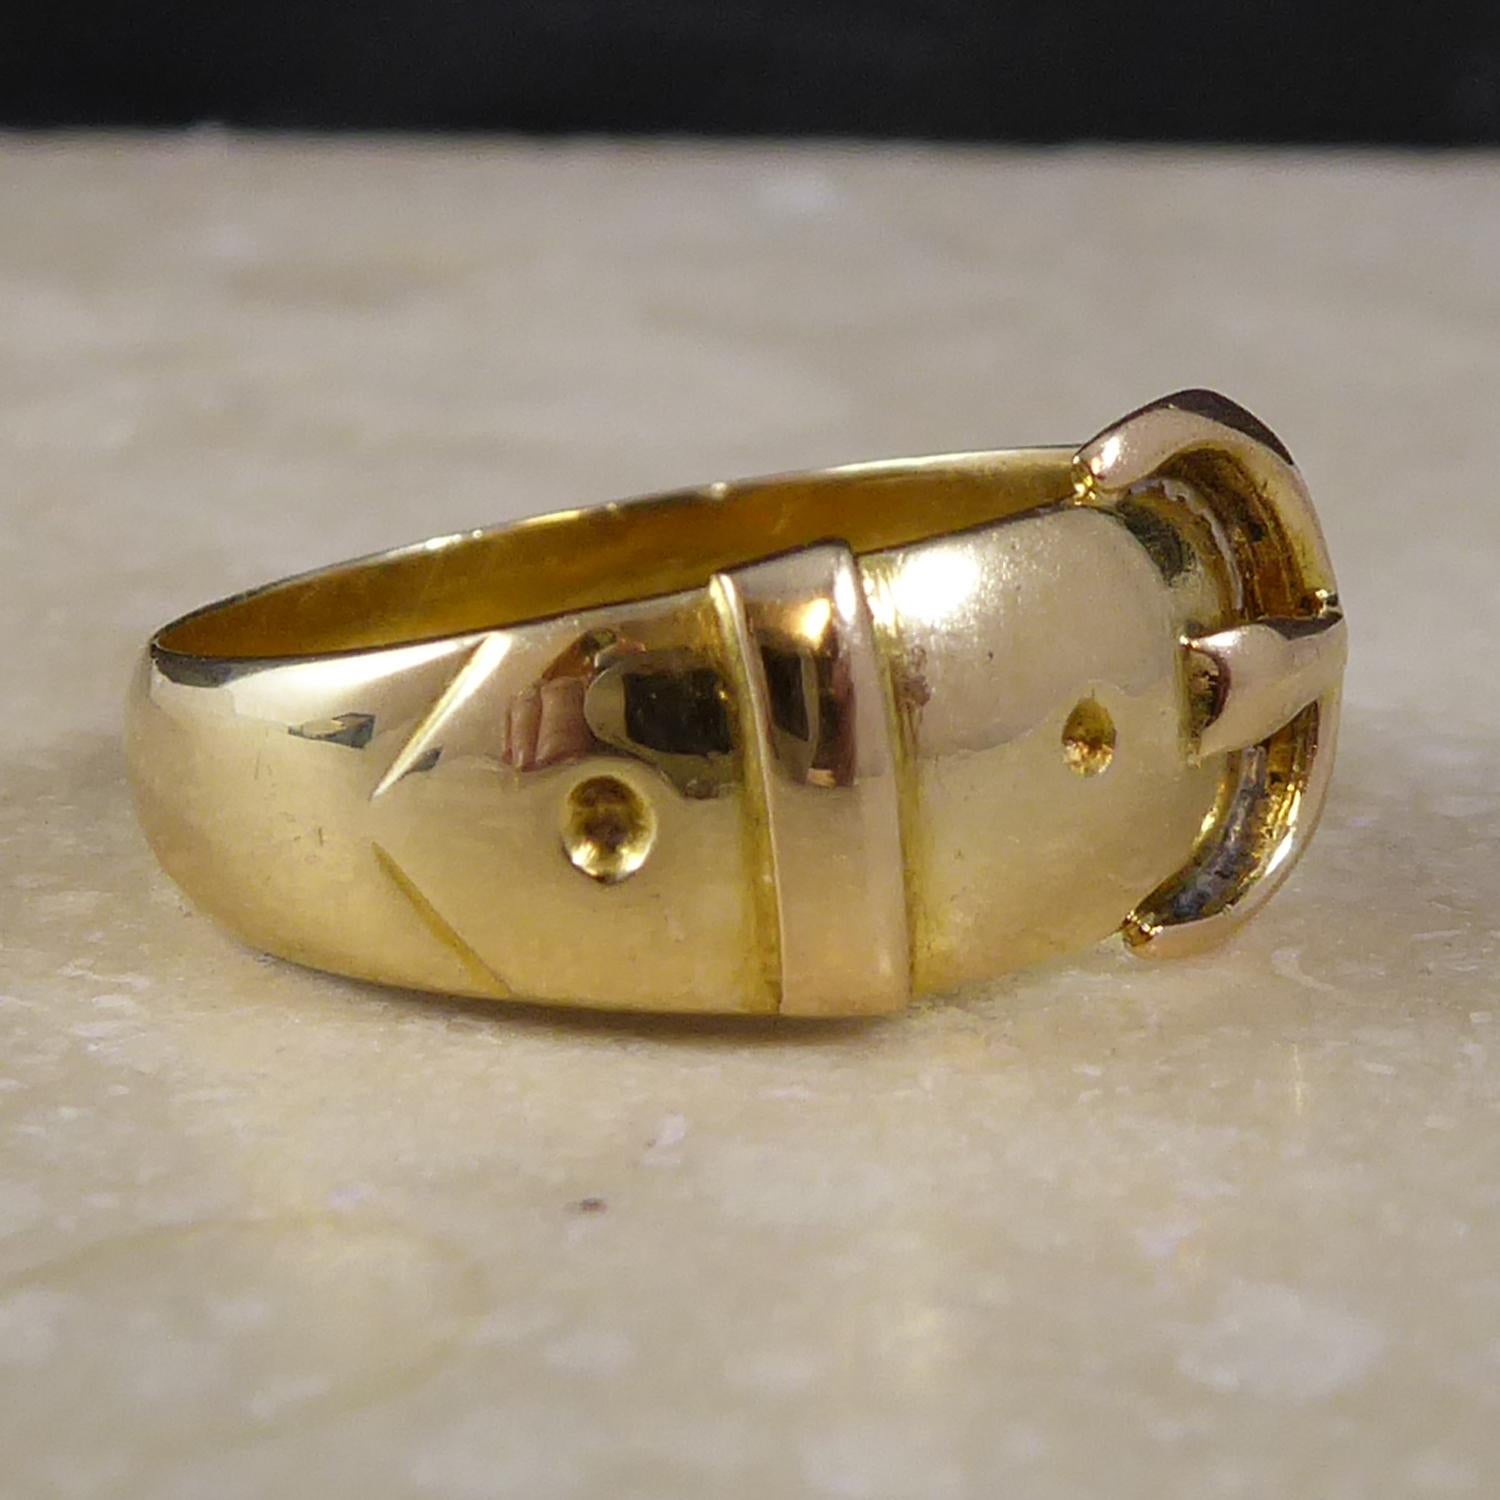 A beautiful antique ring crafted in 18ct yellow gold.  The ring is designed in the form of a buckled belt, a popular motif in Victorian jewellery.  Hallmarked at the Birmingham Assay Office in 1896, the hallmarked having been stamped beneath the